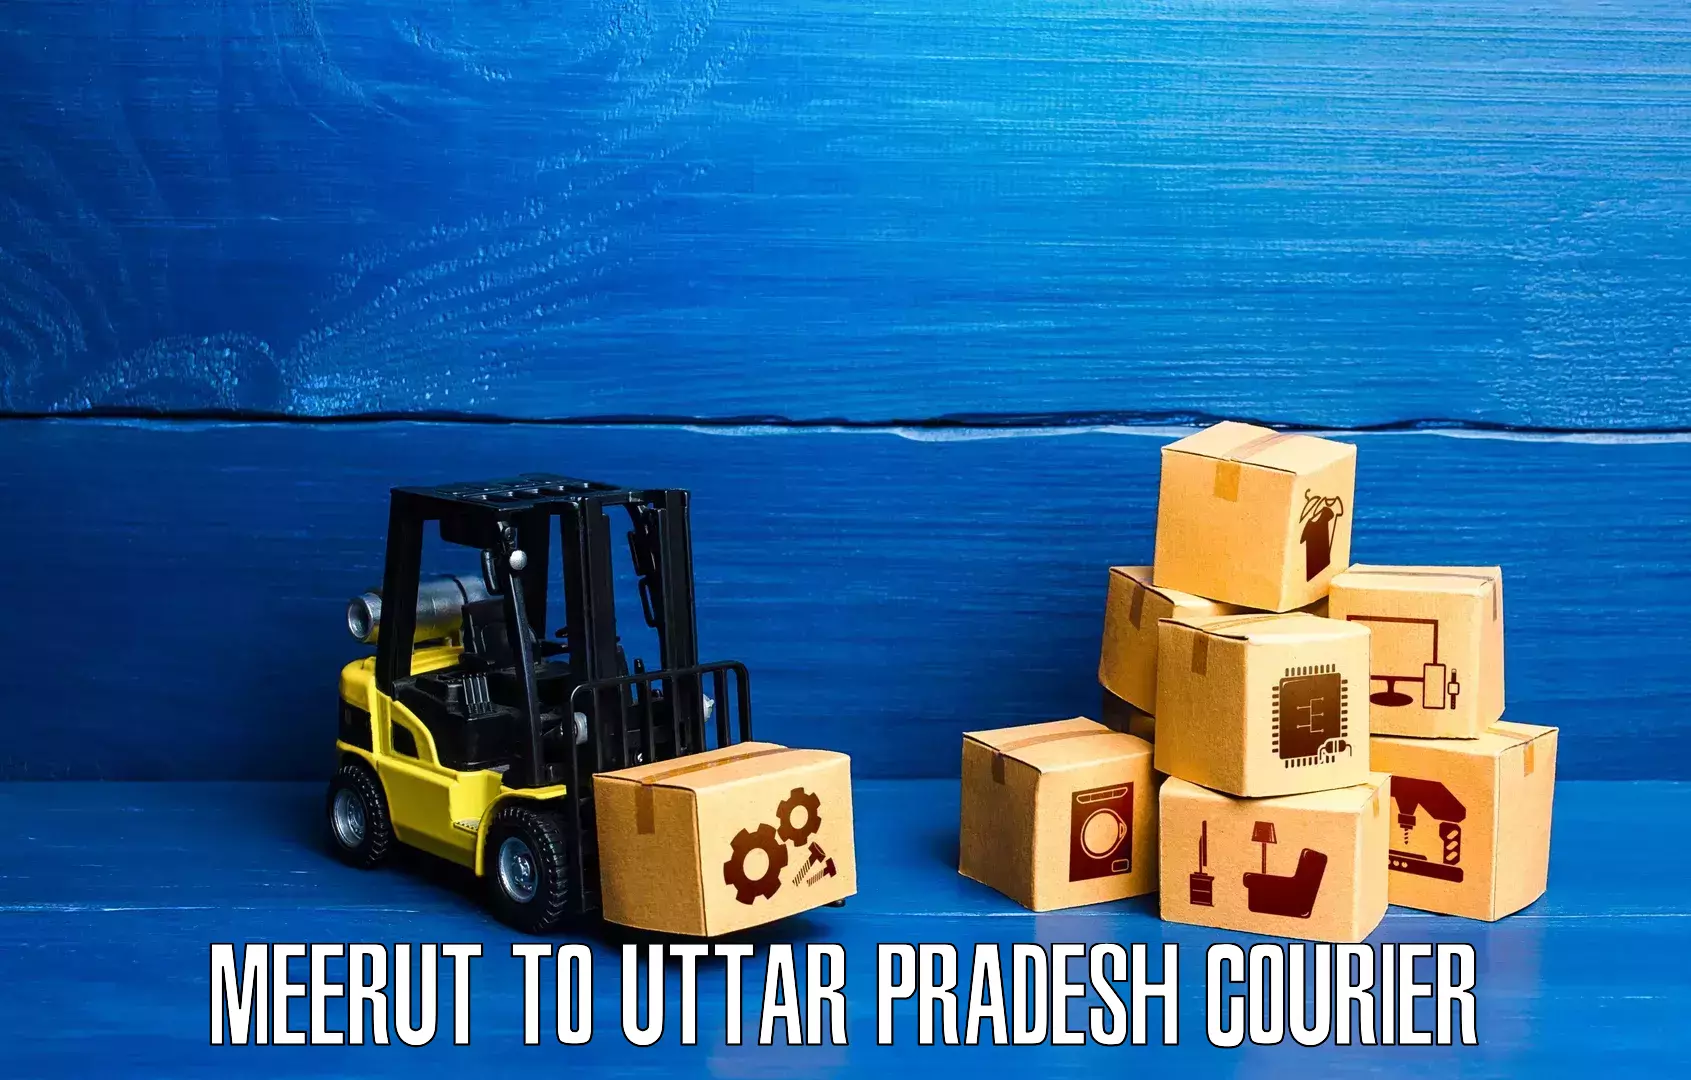 High-capacity parcel service Meerut to Agra